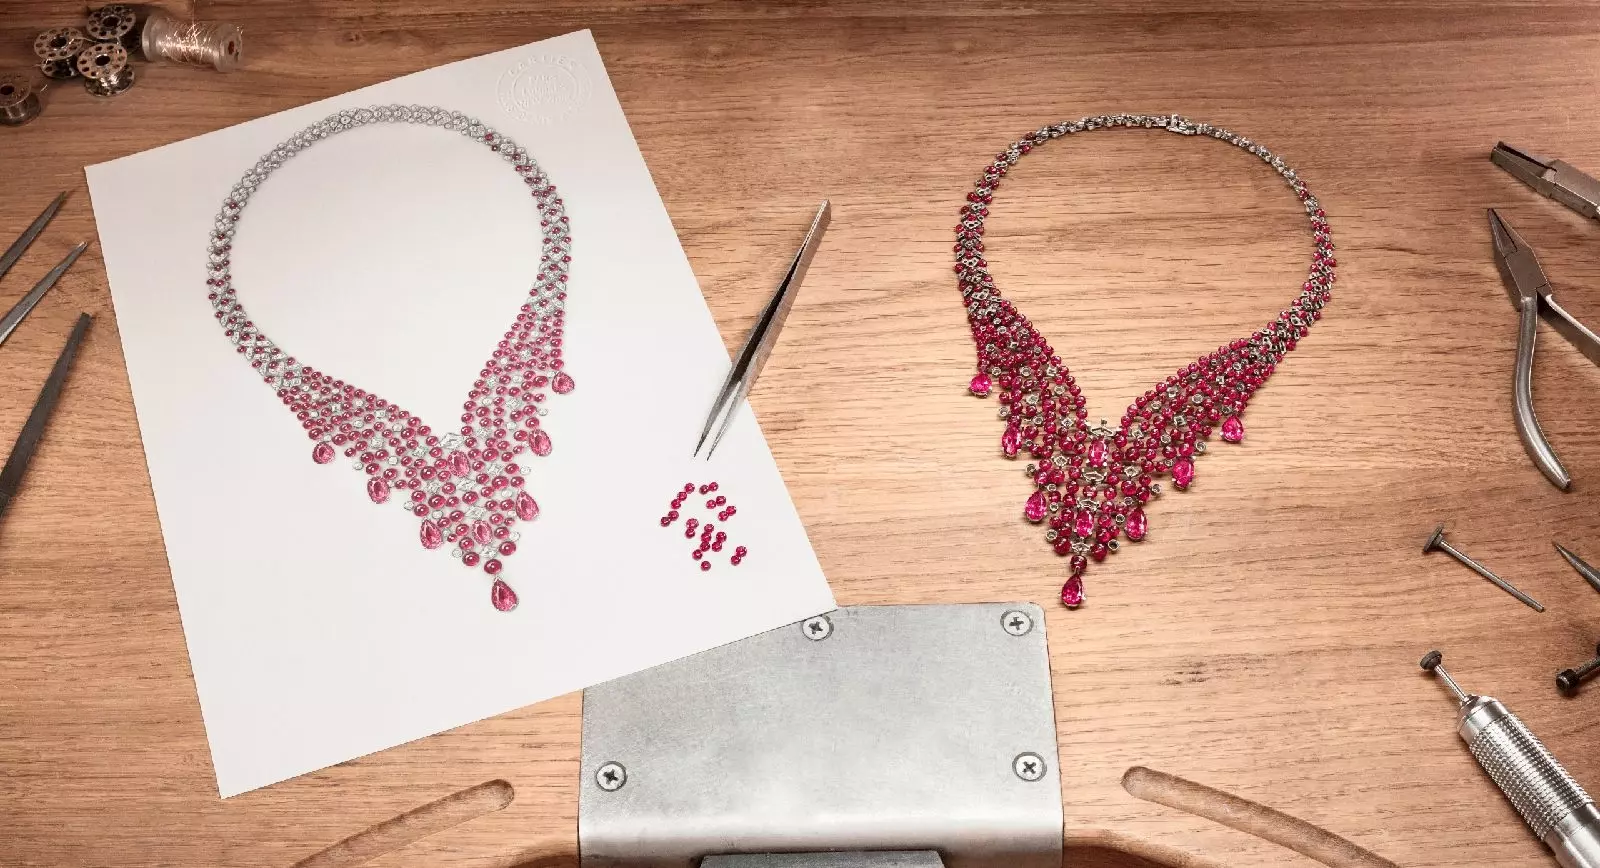 Cartier Splendens necklace with spinel beads, faceted spinels and diamonds from the Beautés du Monde High Jewellery Collection